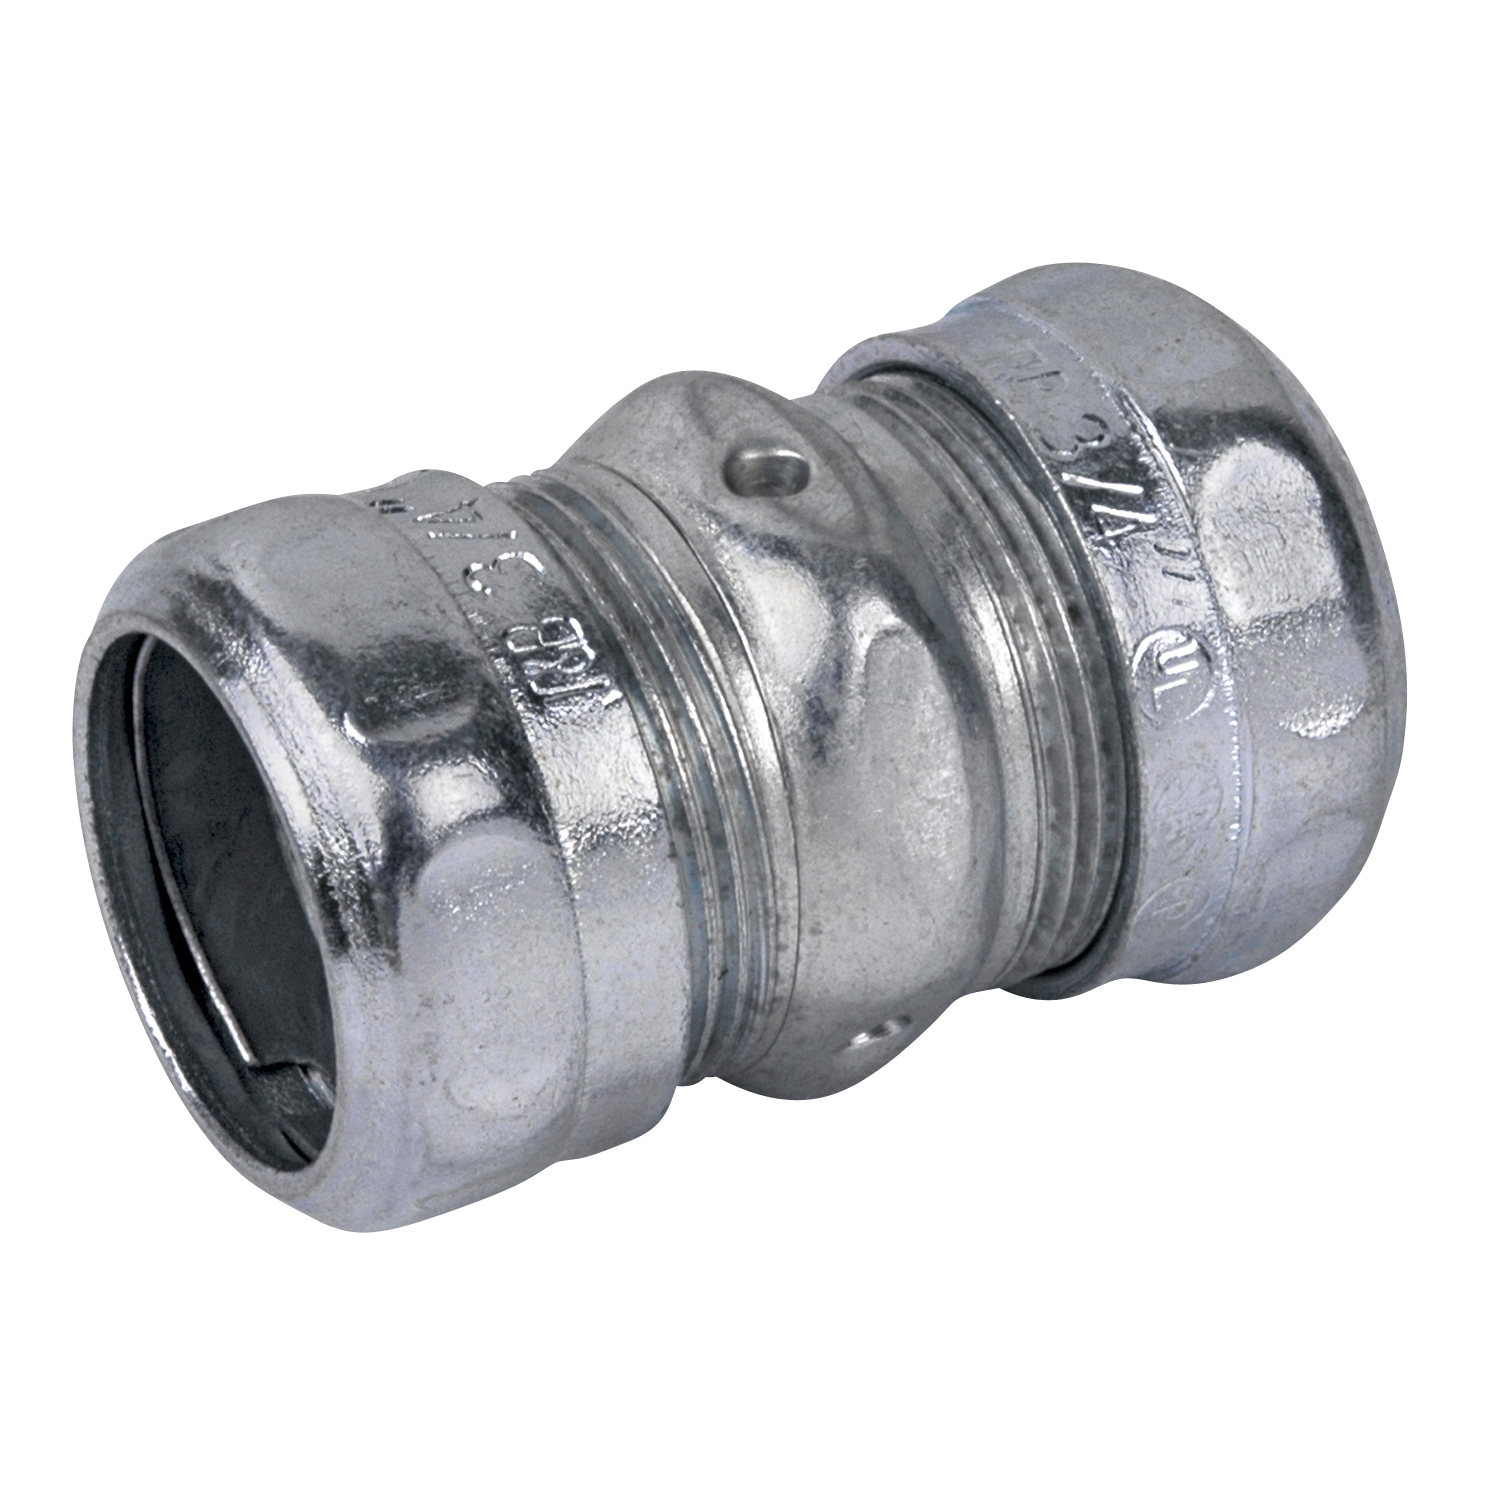 Thomas & Betts TK112A Steel City Compression Coupling